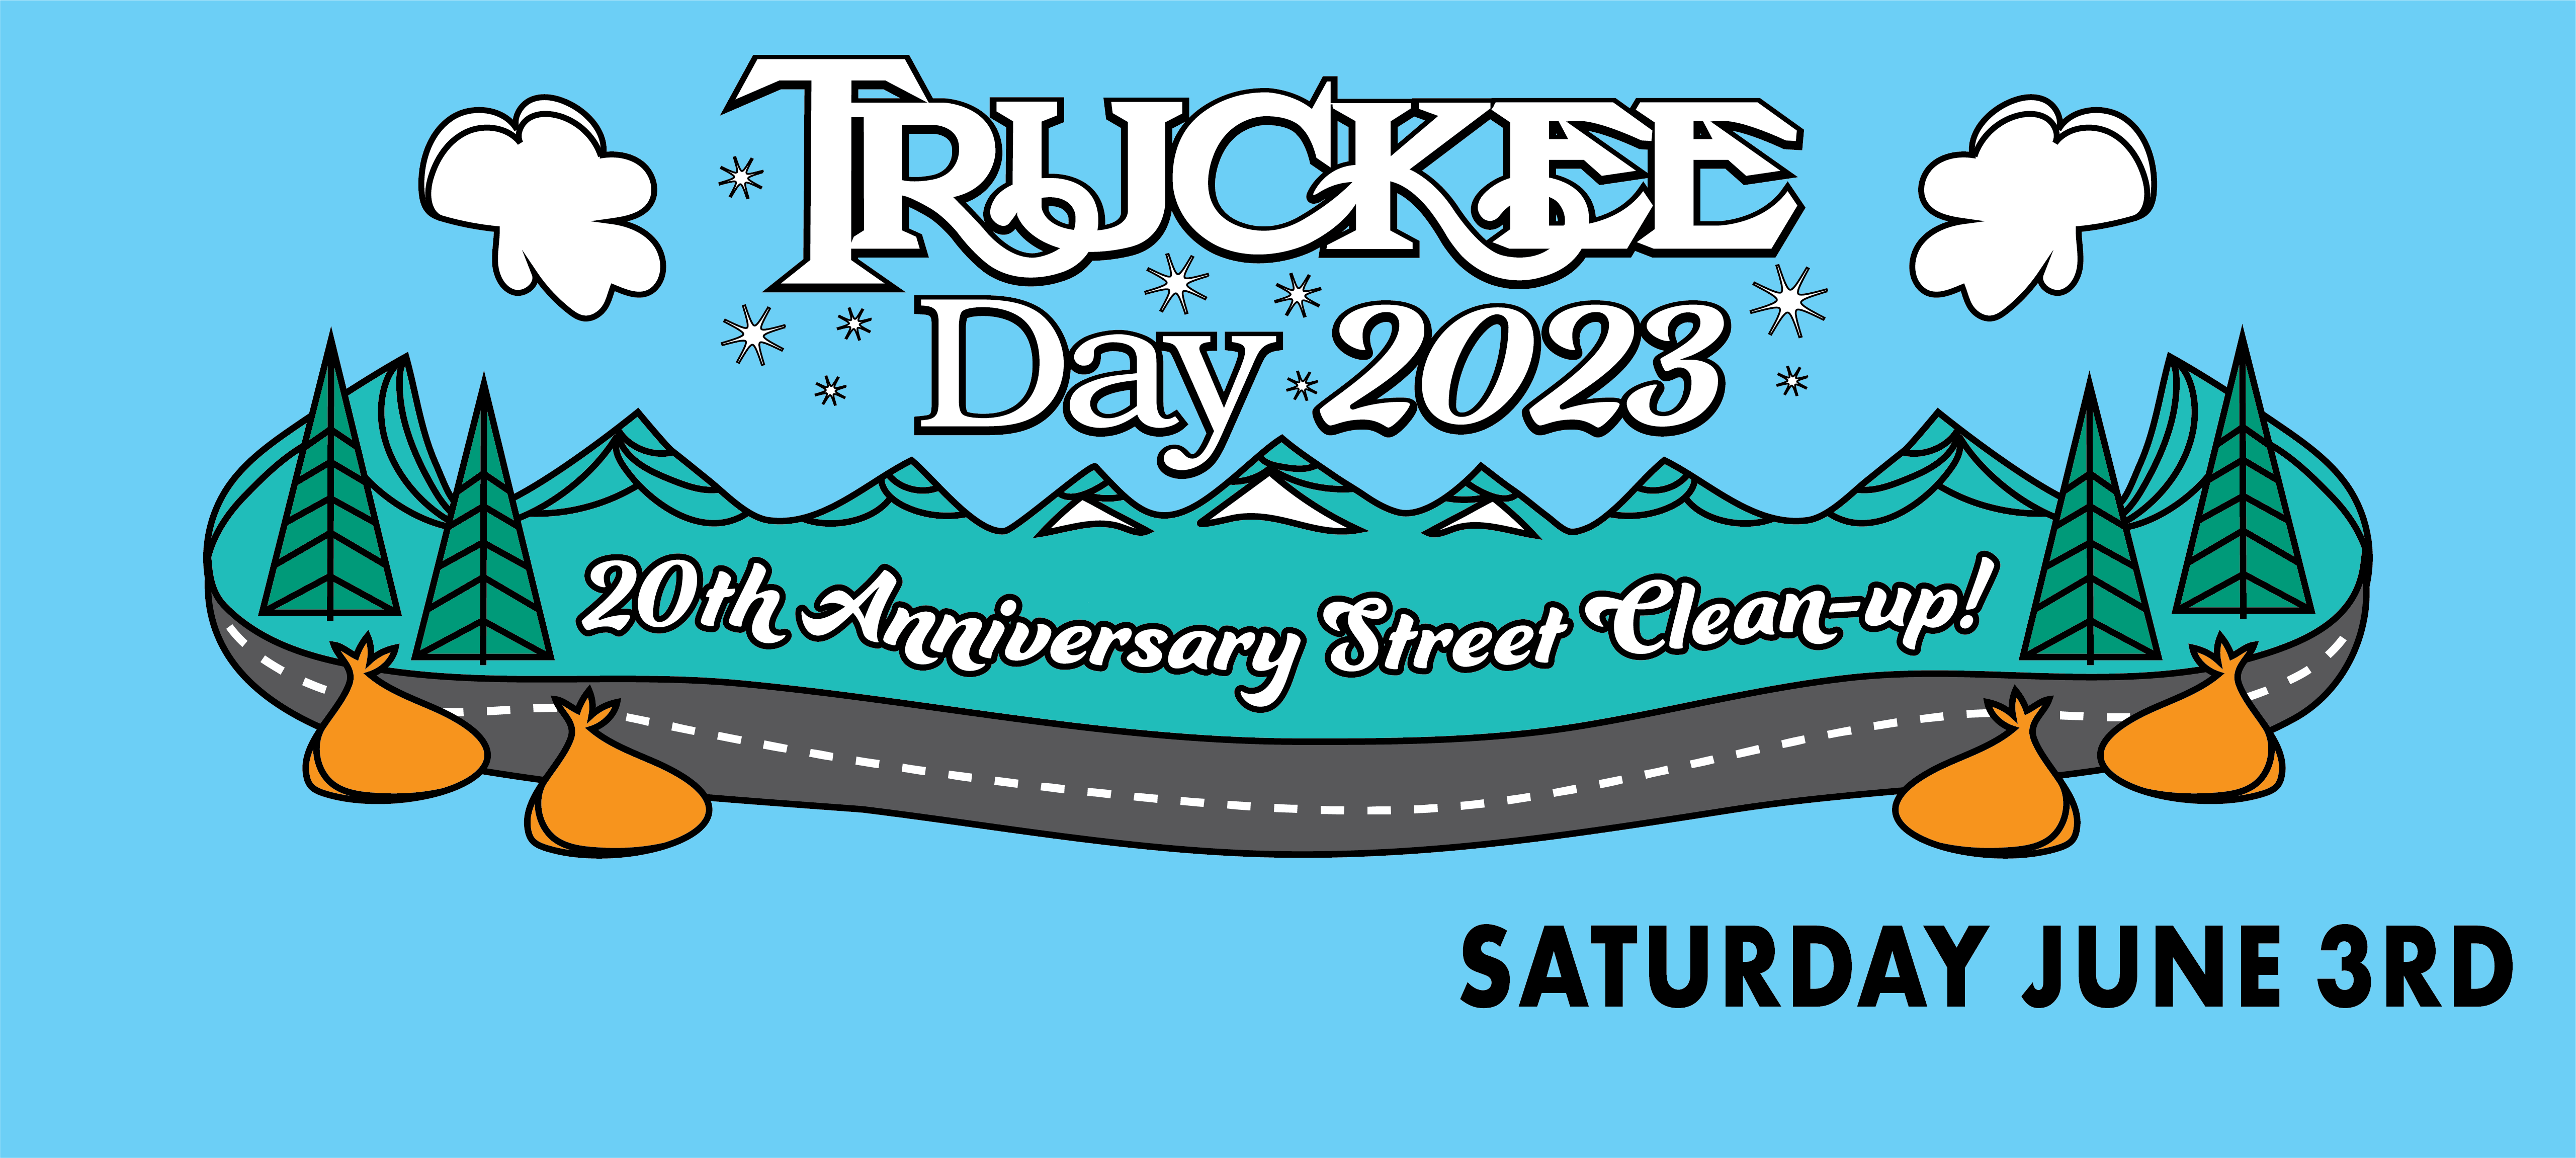 Pre-register to participate in Truckee Day 2023! image